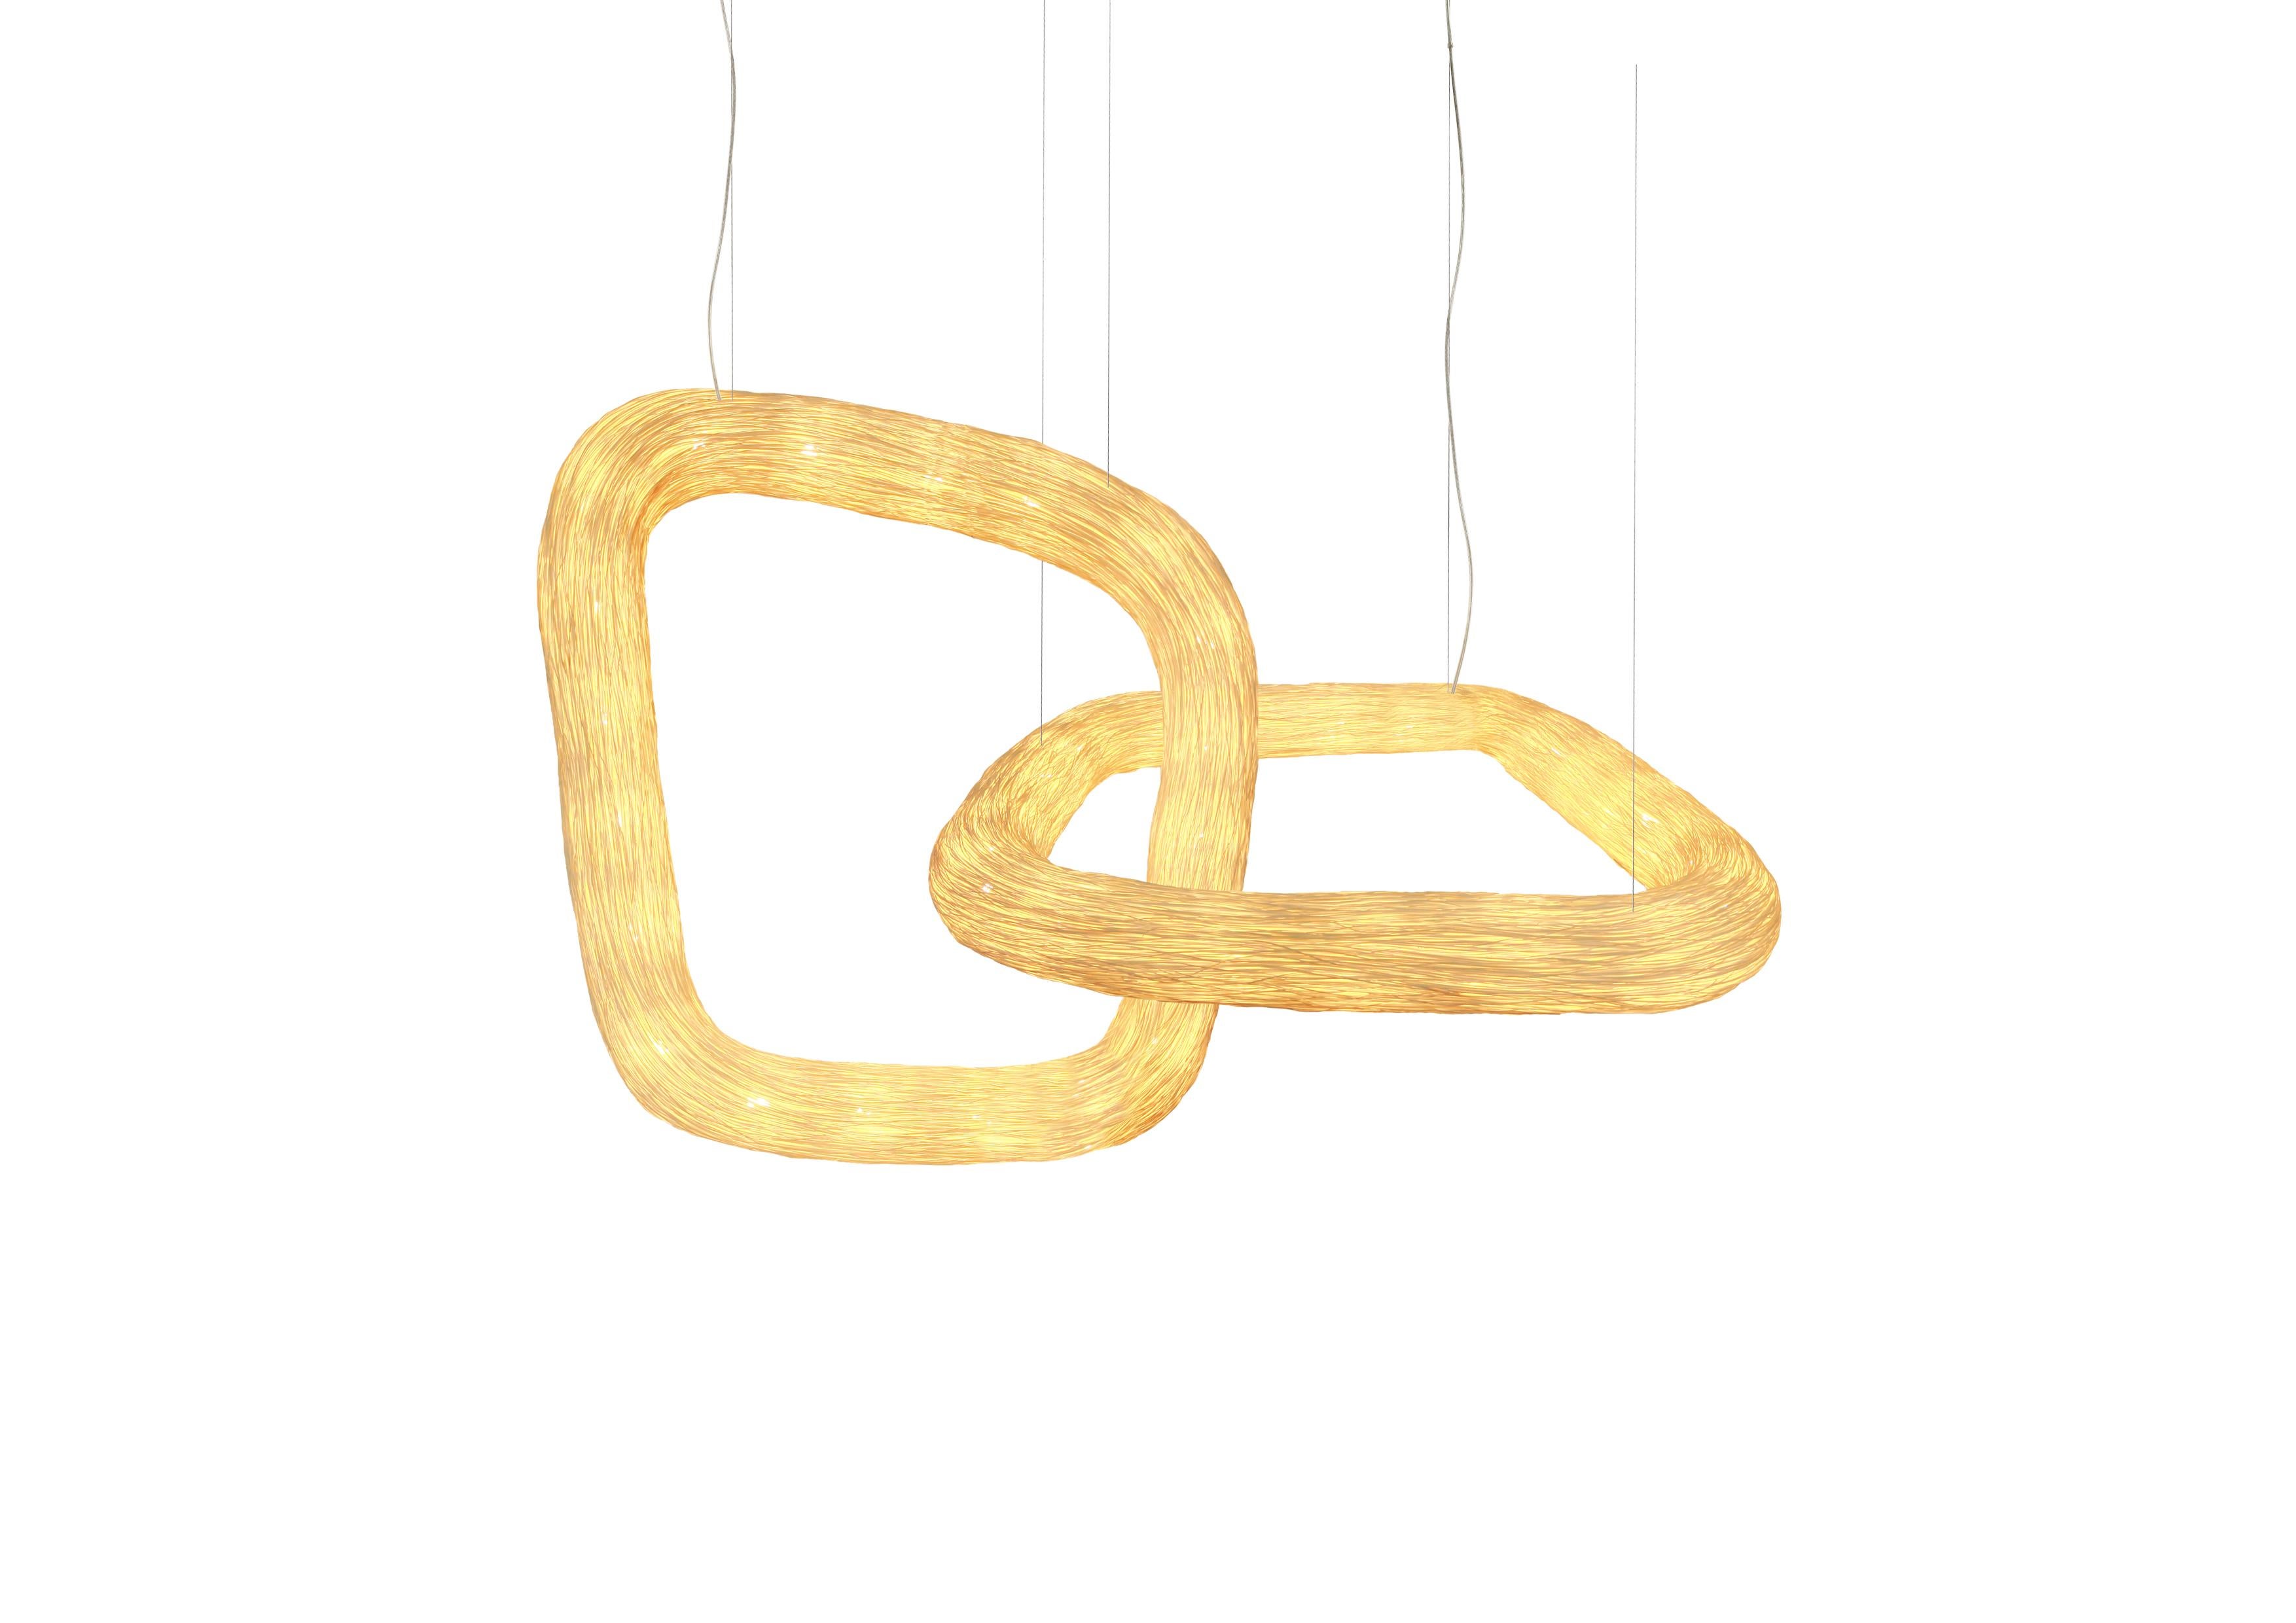 Double Orbit is a unique architectonic rattan ceiling light that is part of the Ango continuity series, where two handcrafted interlocking organic light ring forms reference a double infinity ring and the eternal bond this represents. Multiple